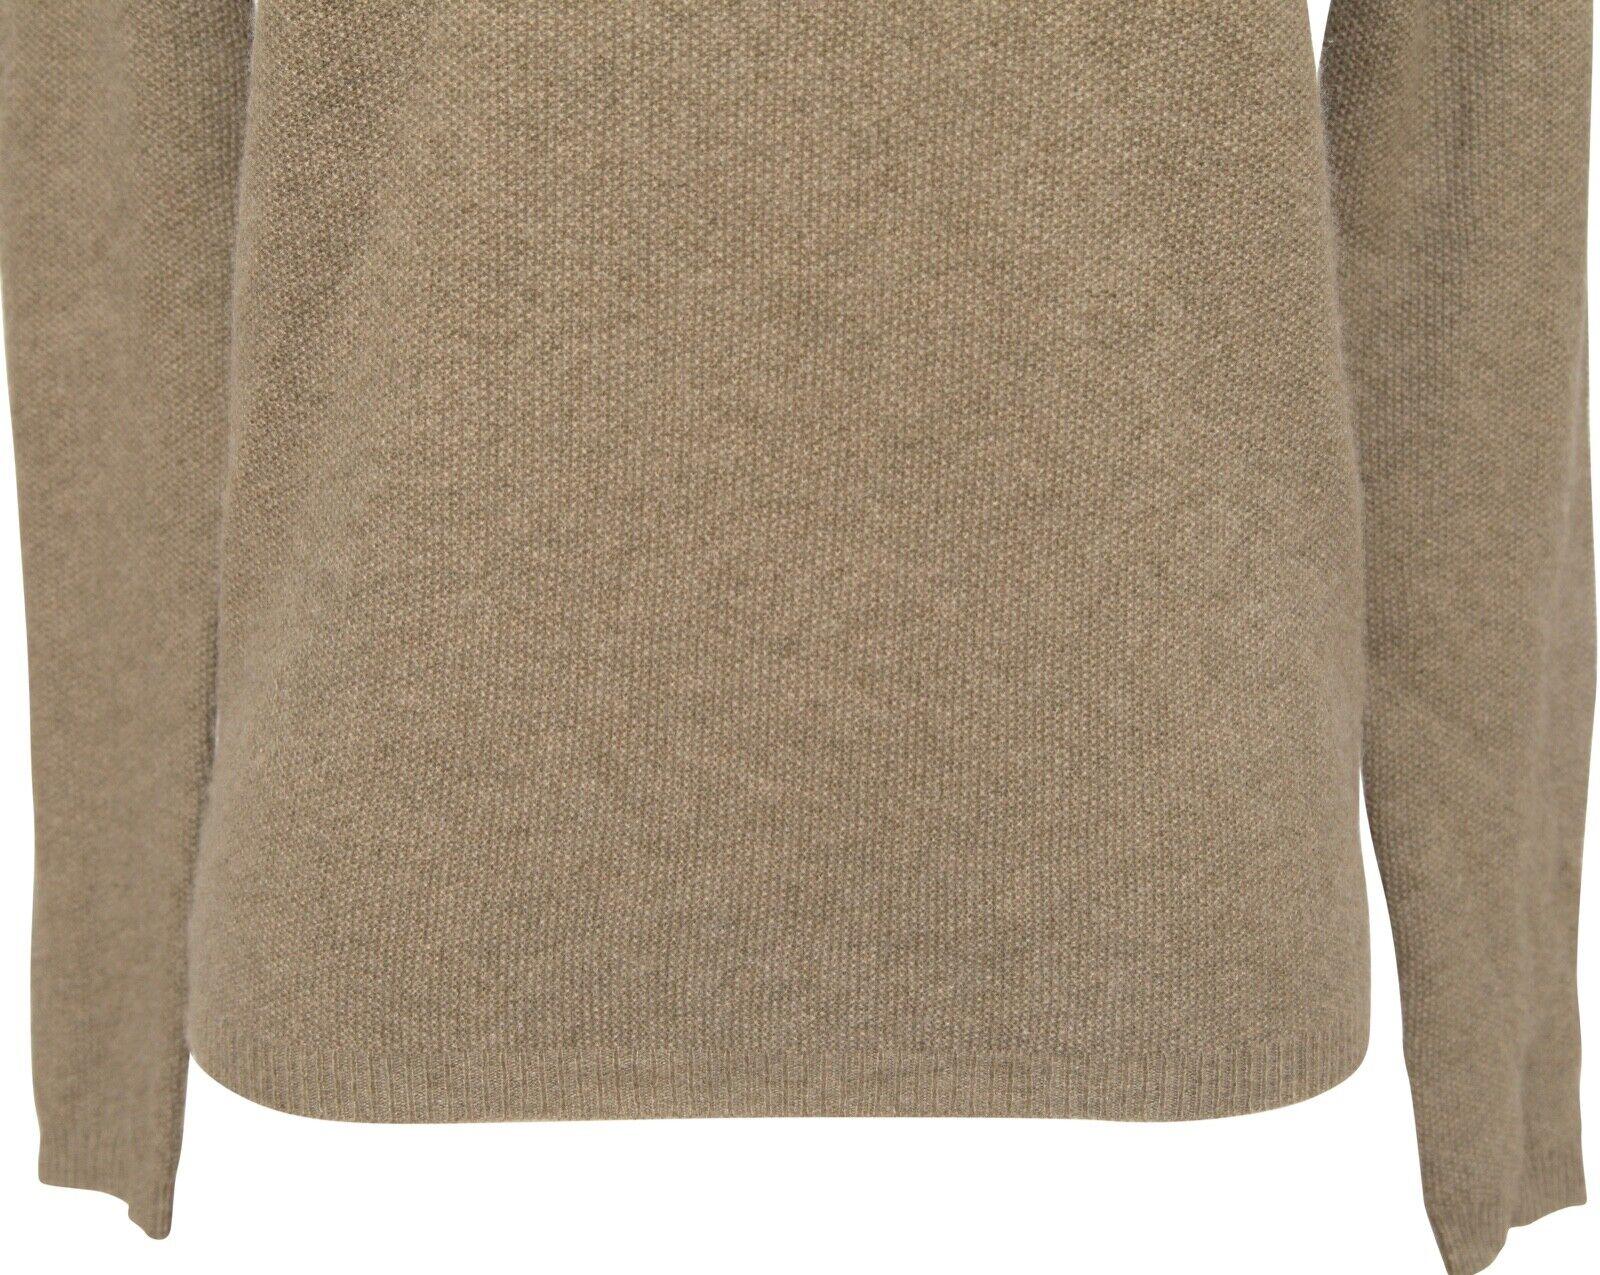 CHLOE Sweater Knit Top Shirt Long Sleeve Cashmere Mossy Green V-Neck XS For Sale 1